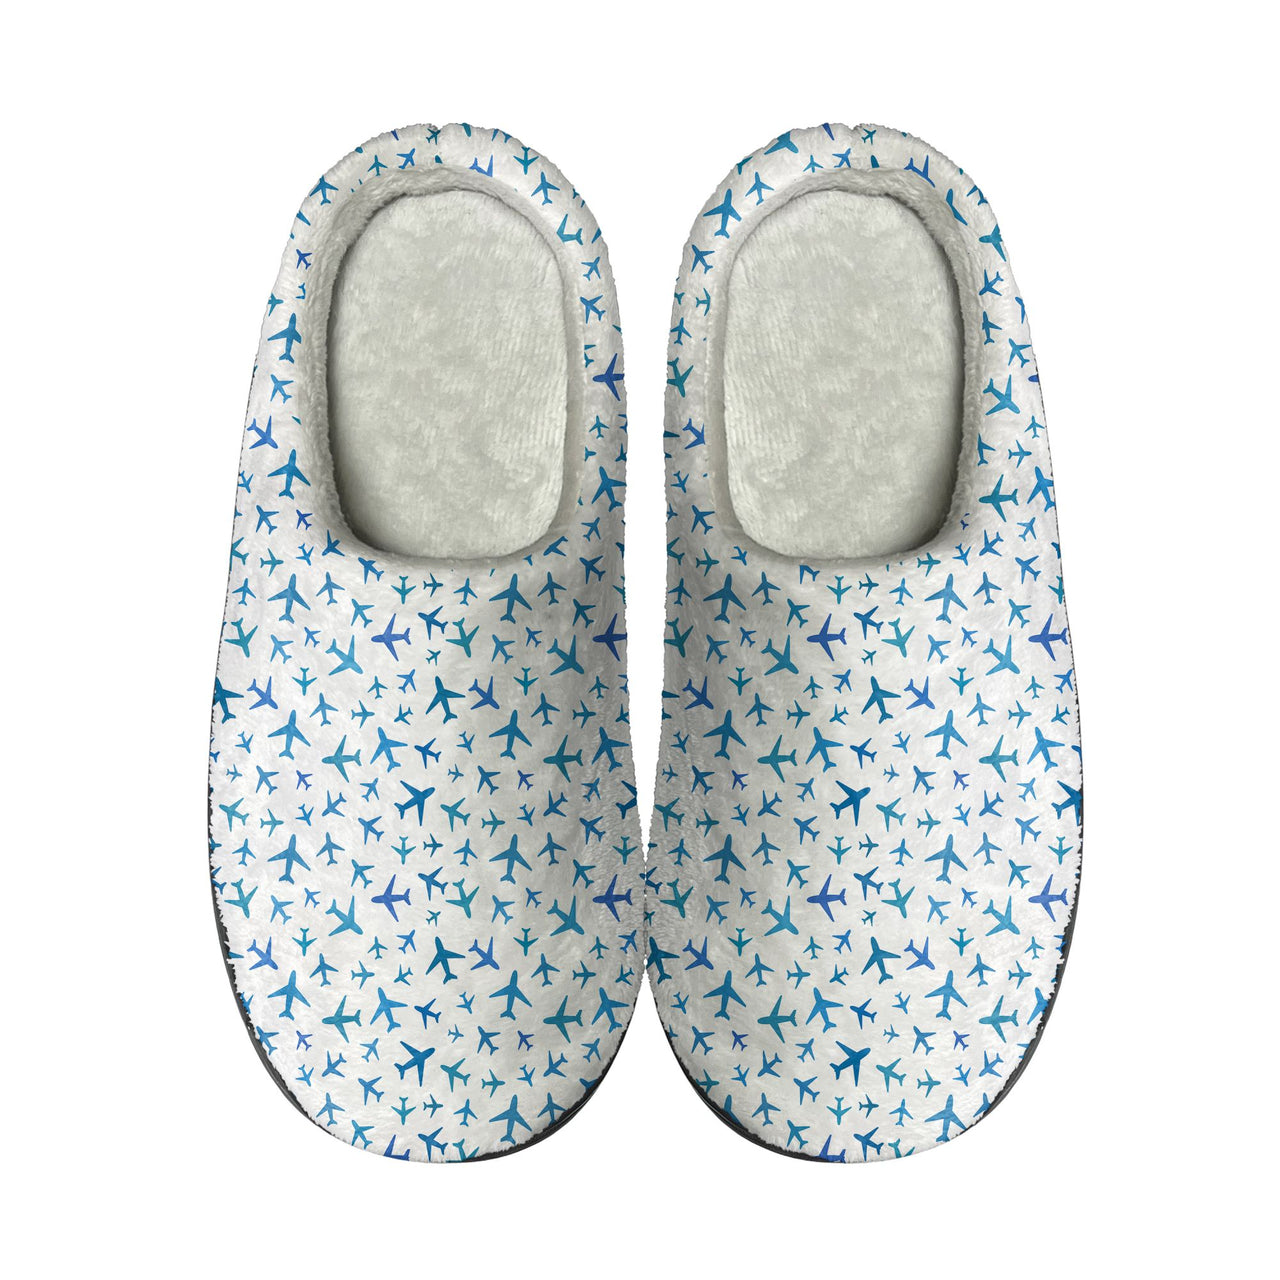 Many Airplanes White Designed Cotton Slippers